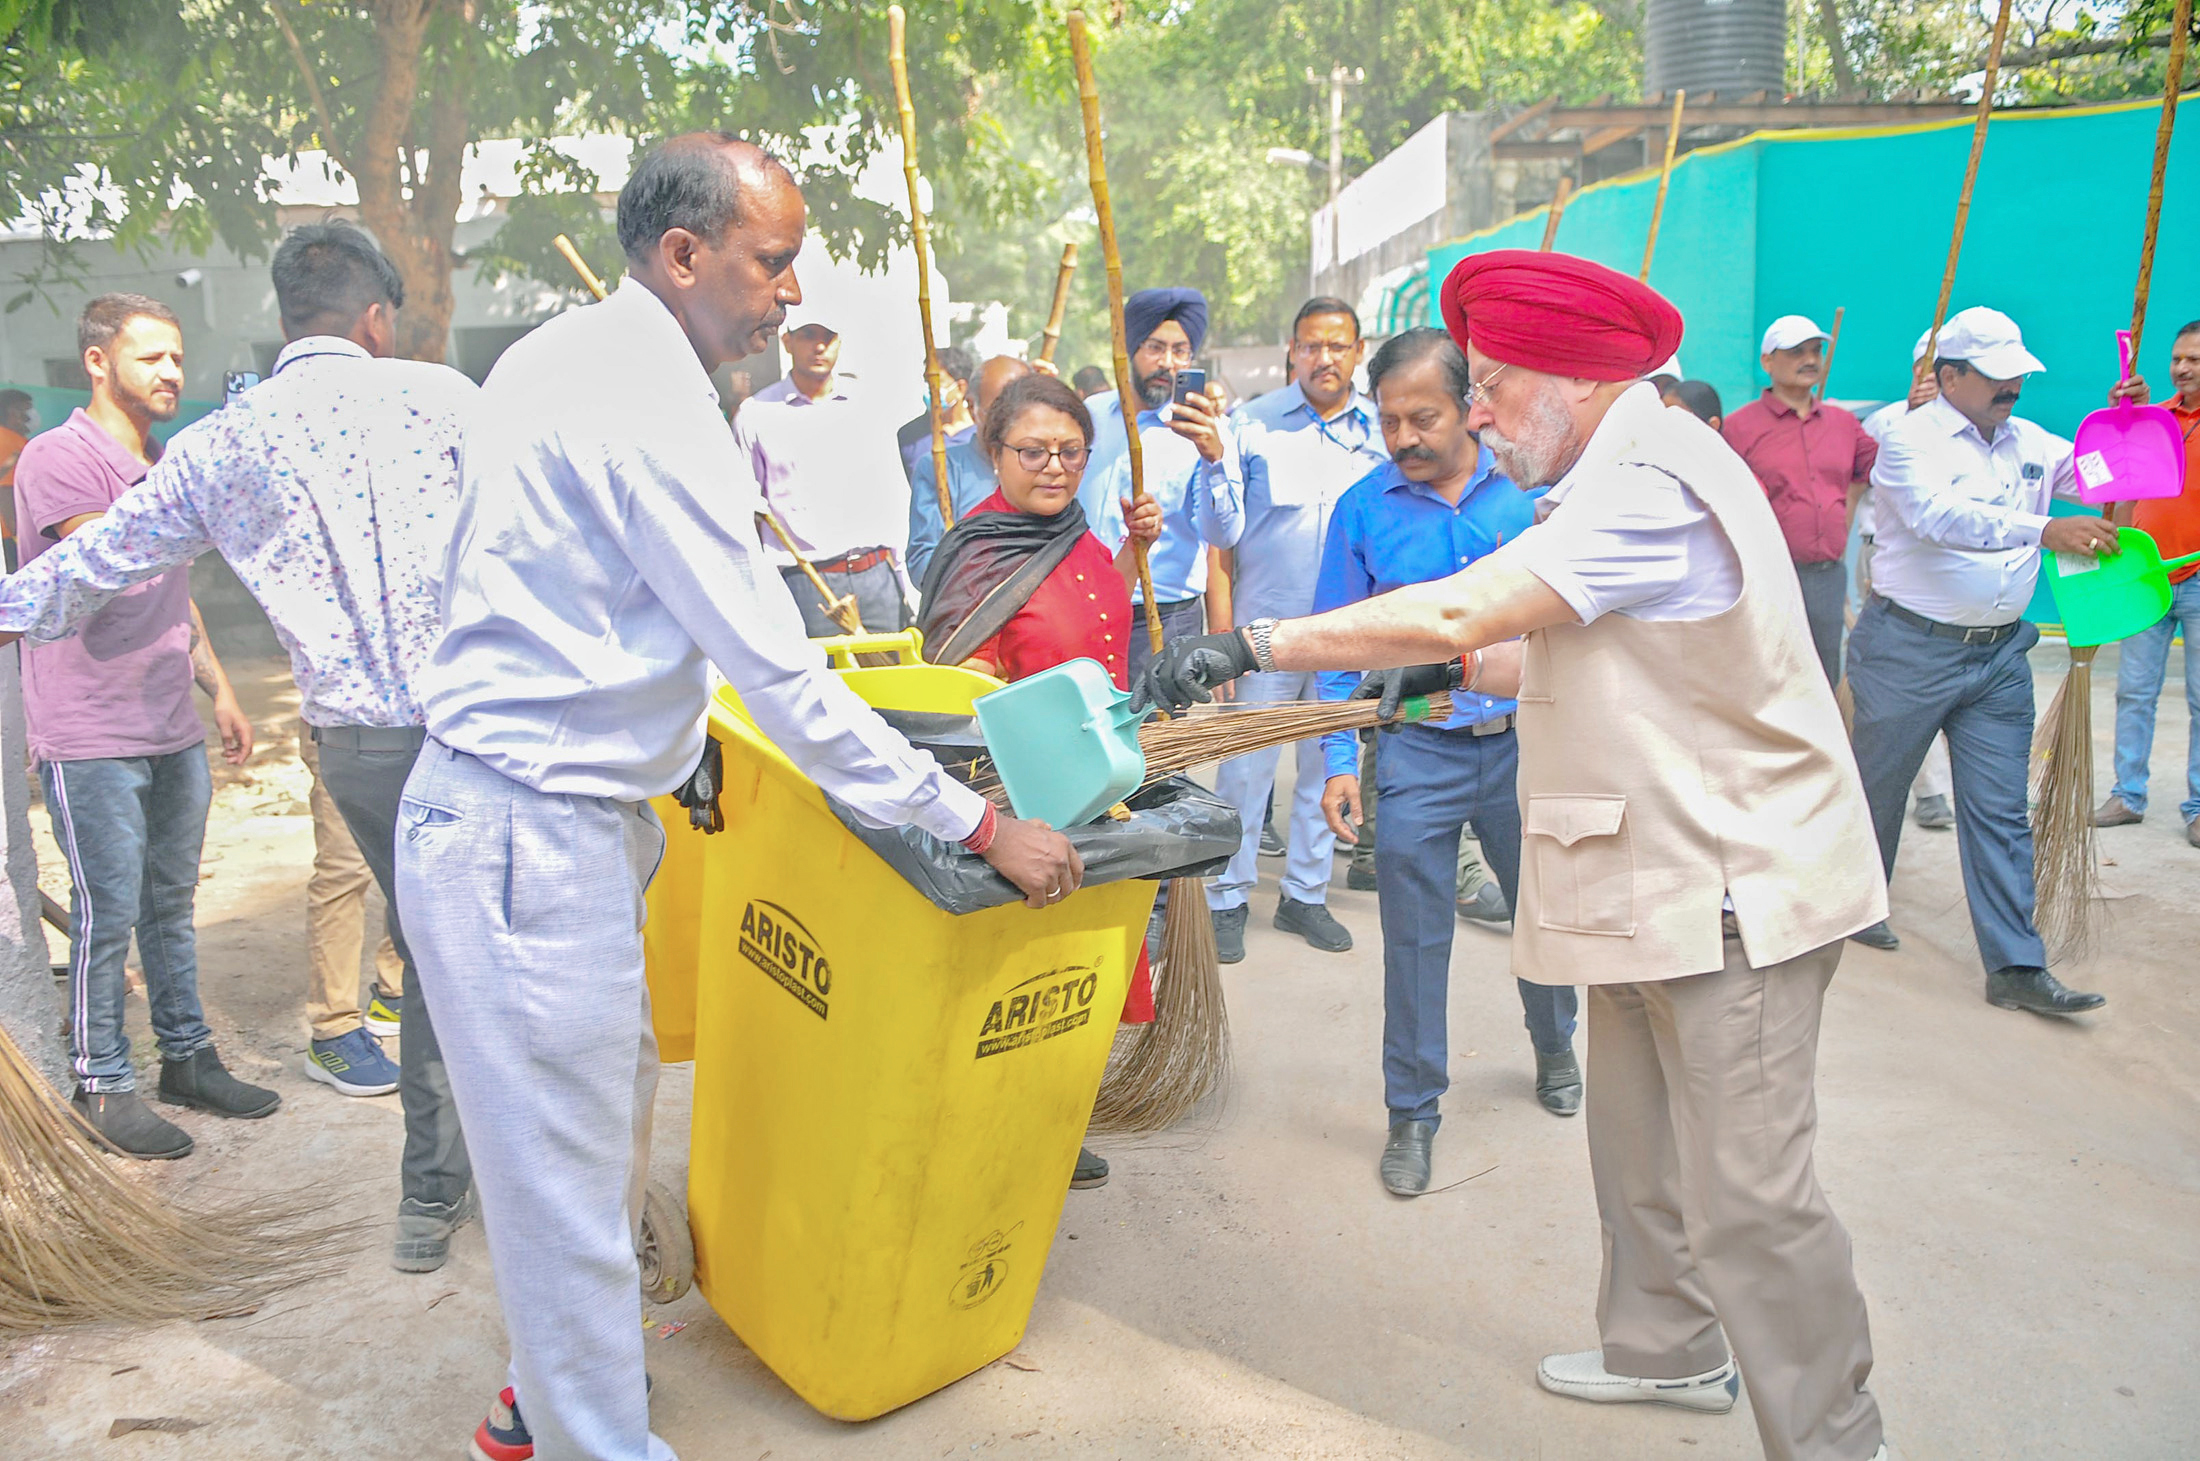 Union Minister for Petroleum and Natural Gas Hardeep Singh Puri participated in the cleanliness work on “Together One Hour Shramdaan for Cleanliness” under Swachchta hi Seva campaign in the remembering the inspirations of Father of the Nation Mahatma Gandhi at Princess Park (Copernicus Marg), in New Delhi.